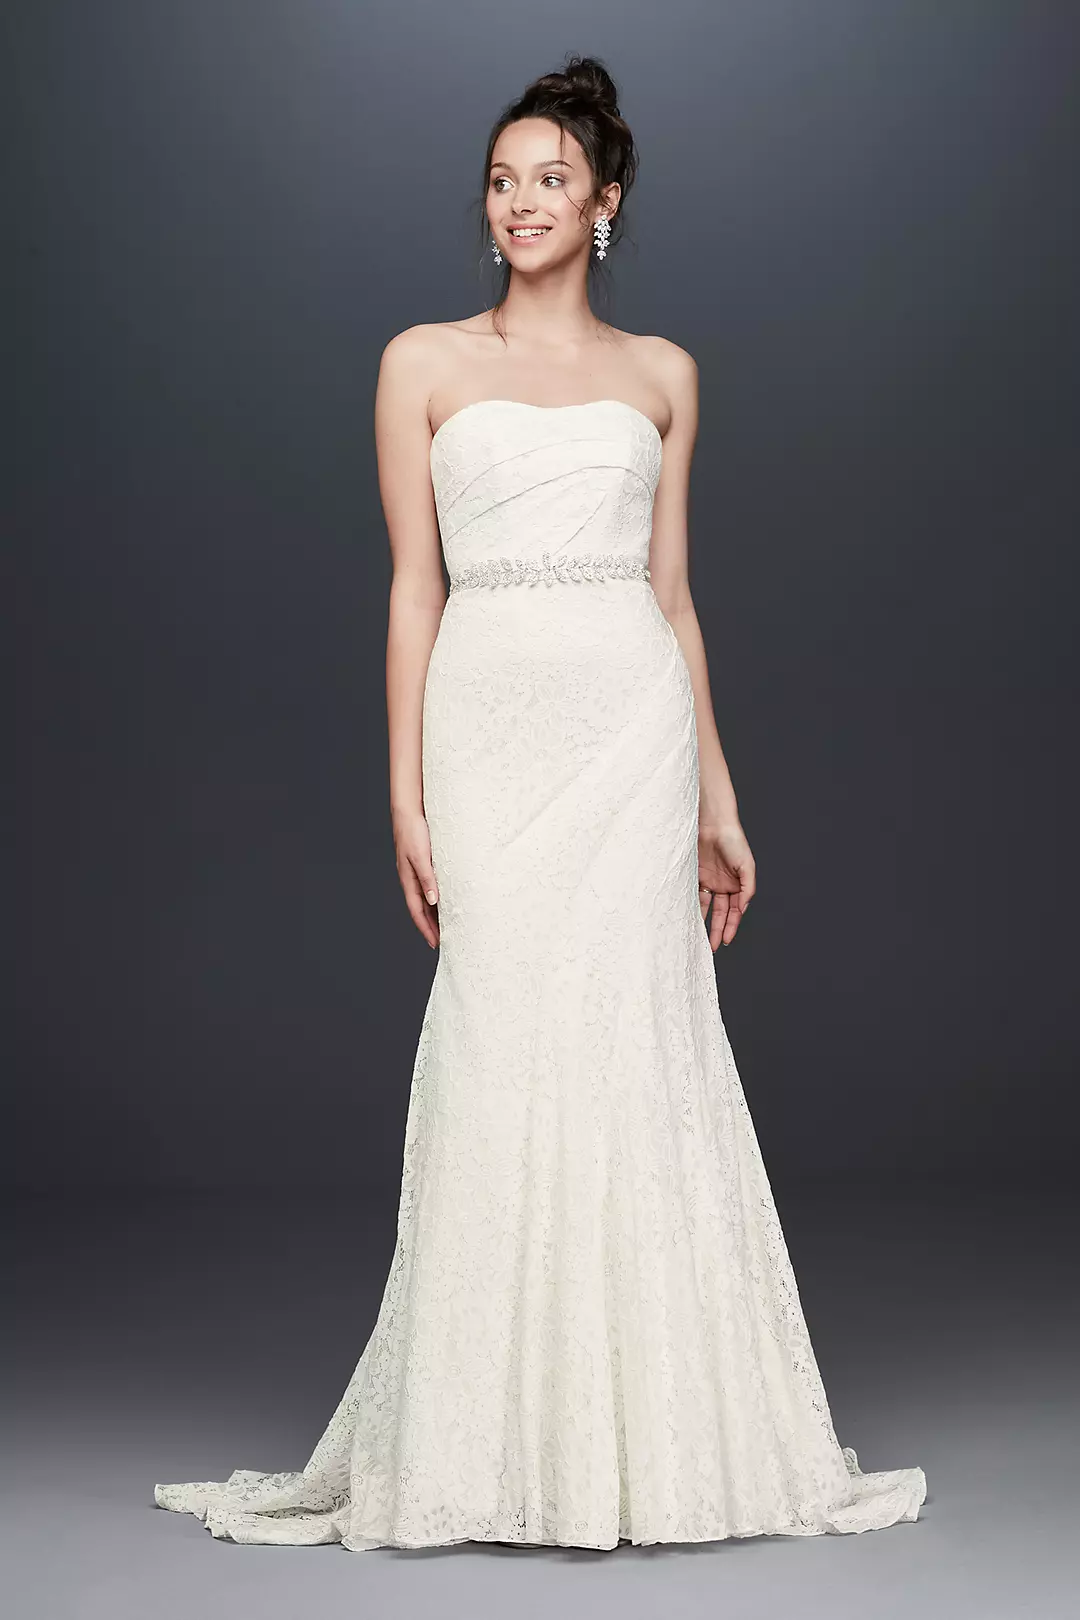 Strapless Floral Crochet Lace Seamed Wedding Dress Image